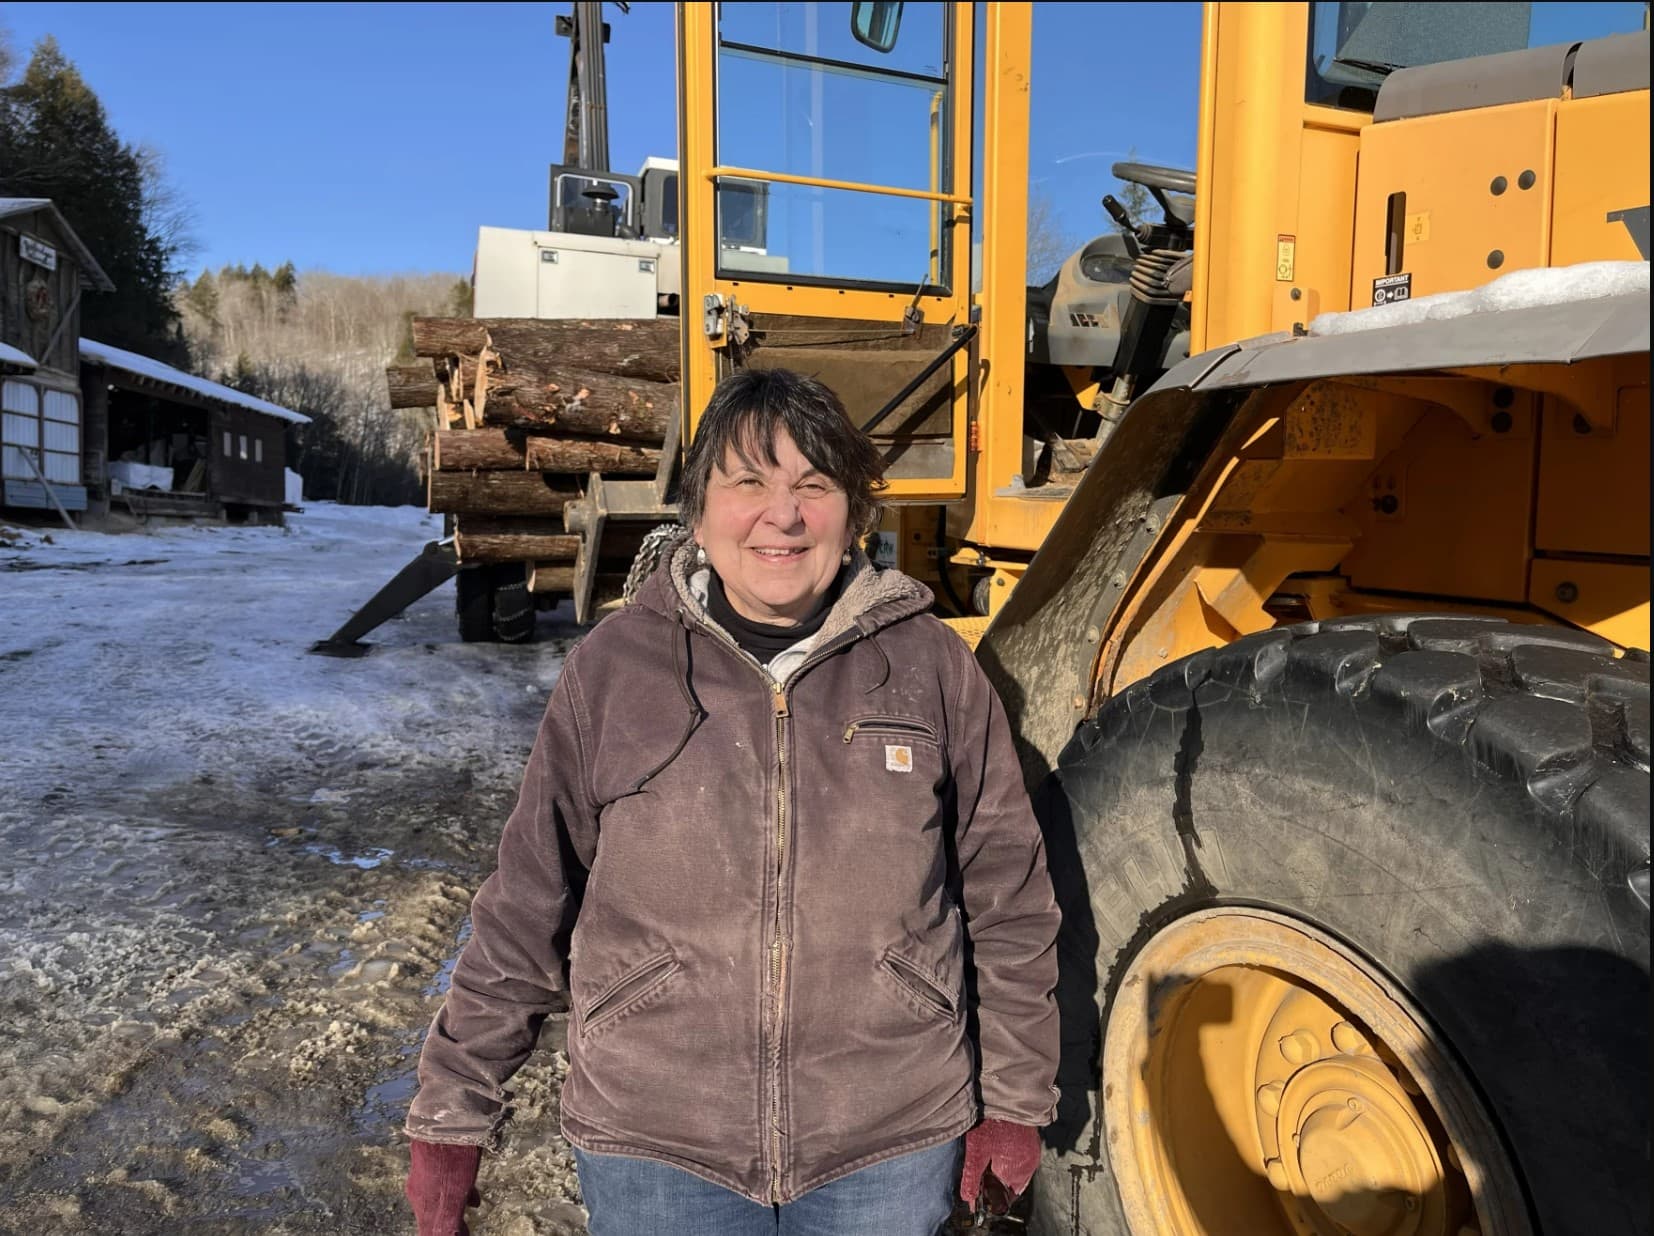 Colleen Goodridge, owner of Goodridge Lumber, is holding out hope that conditions will improve this winter, allowing loggers to harvest more wood. (Henry Epp/Vermont Public)